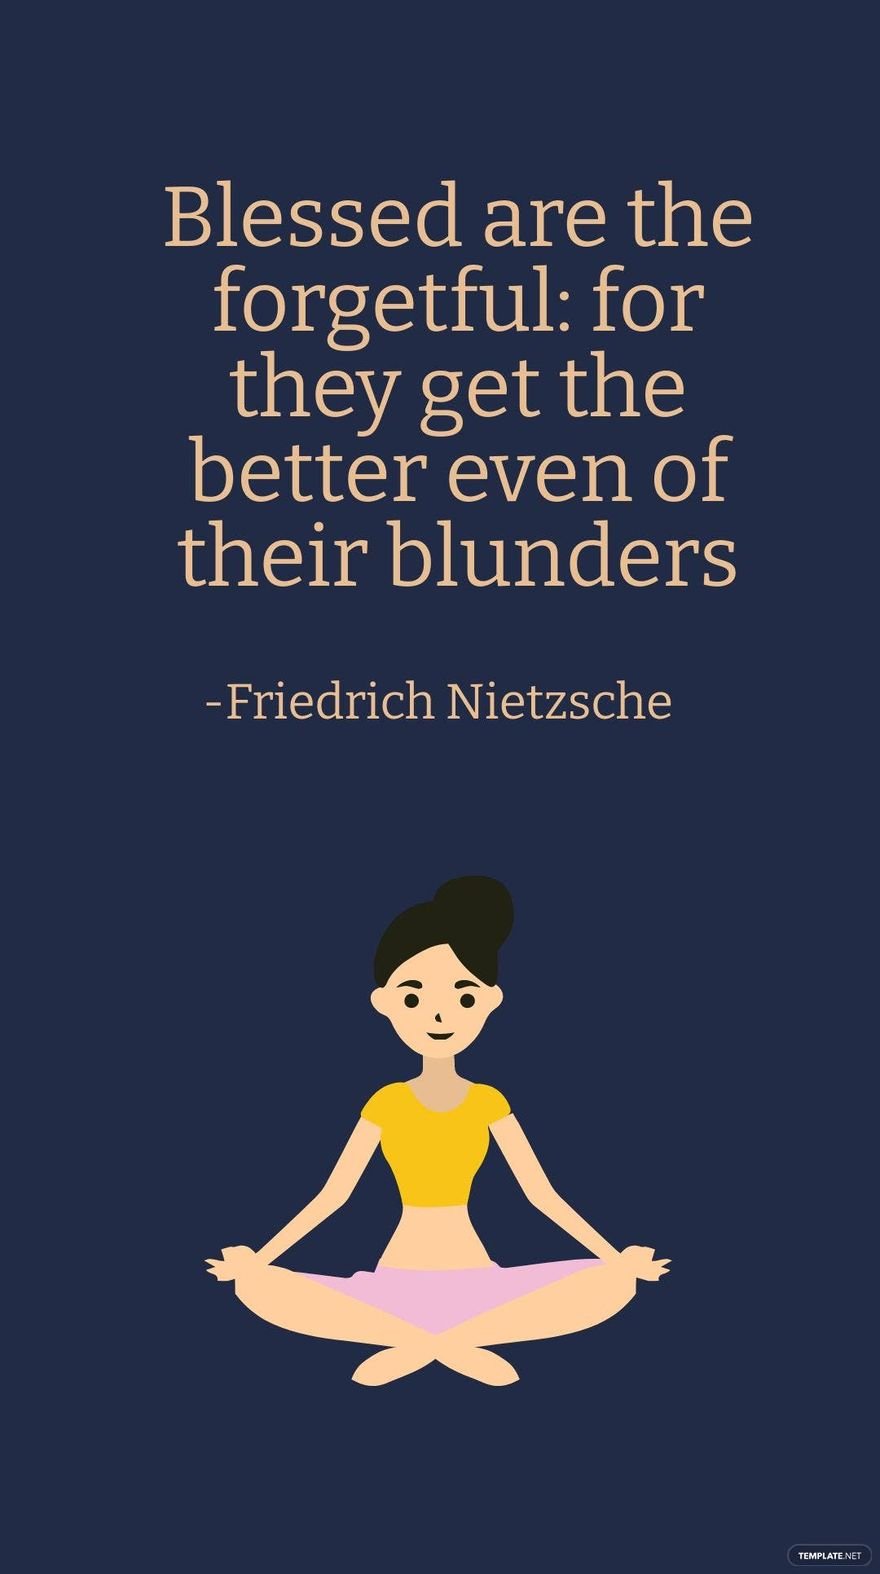 Friedrich Nietzsche - Blessed are the forgetful: for they get the better even of their blunders in JPG